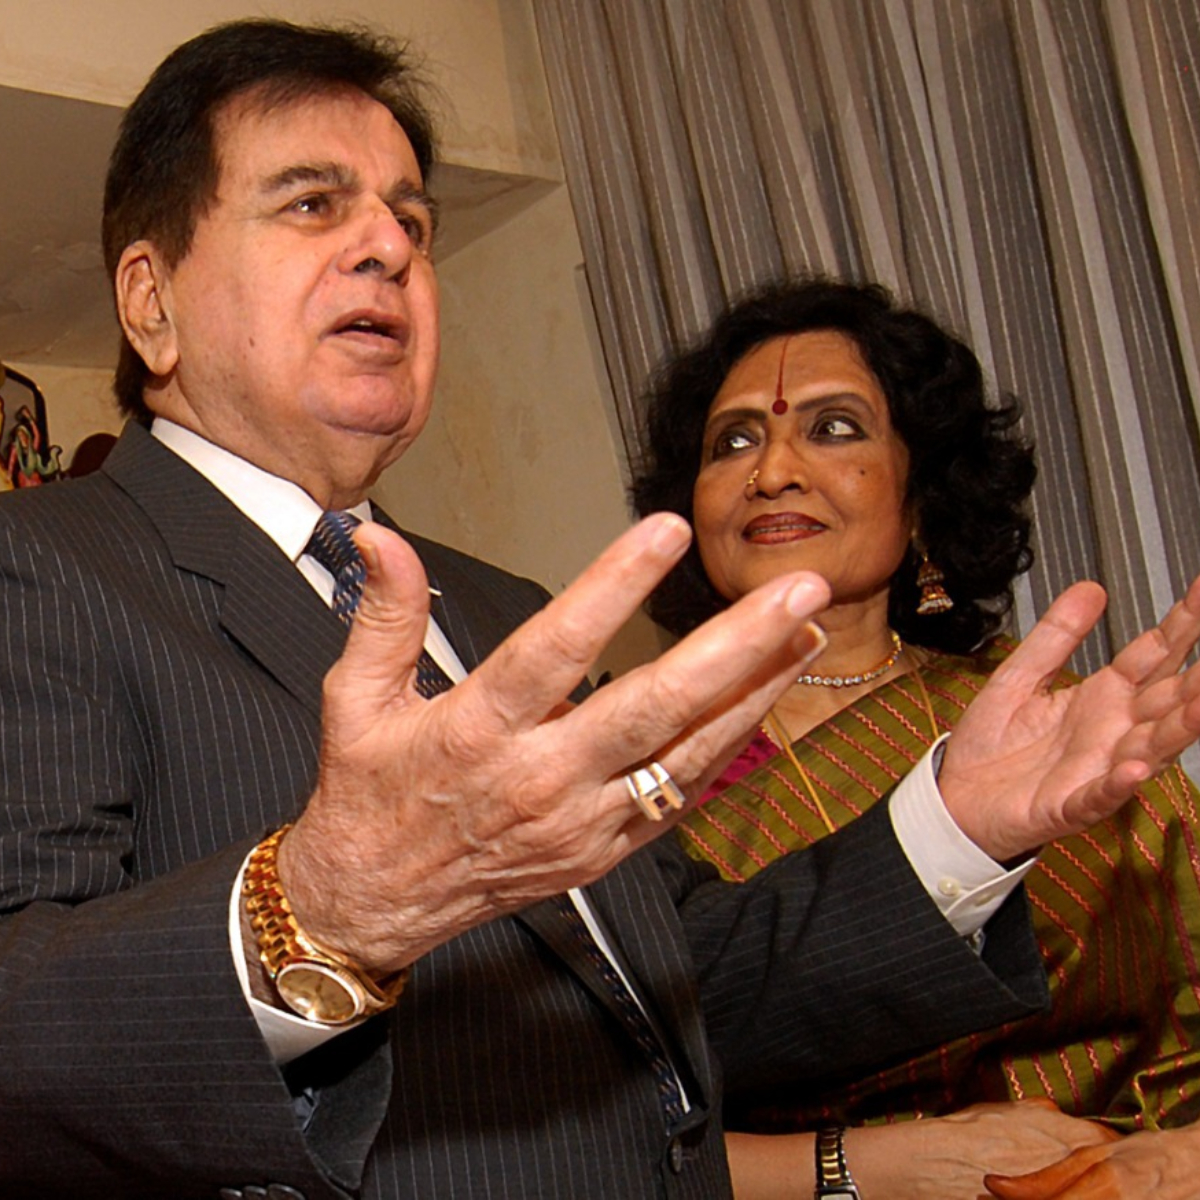 EXCLUSIVE: Vyjayanthimala remembers Dilip Kumar: ‘Saira always says you and Dilip Saab make the best team’